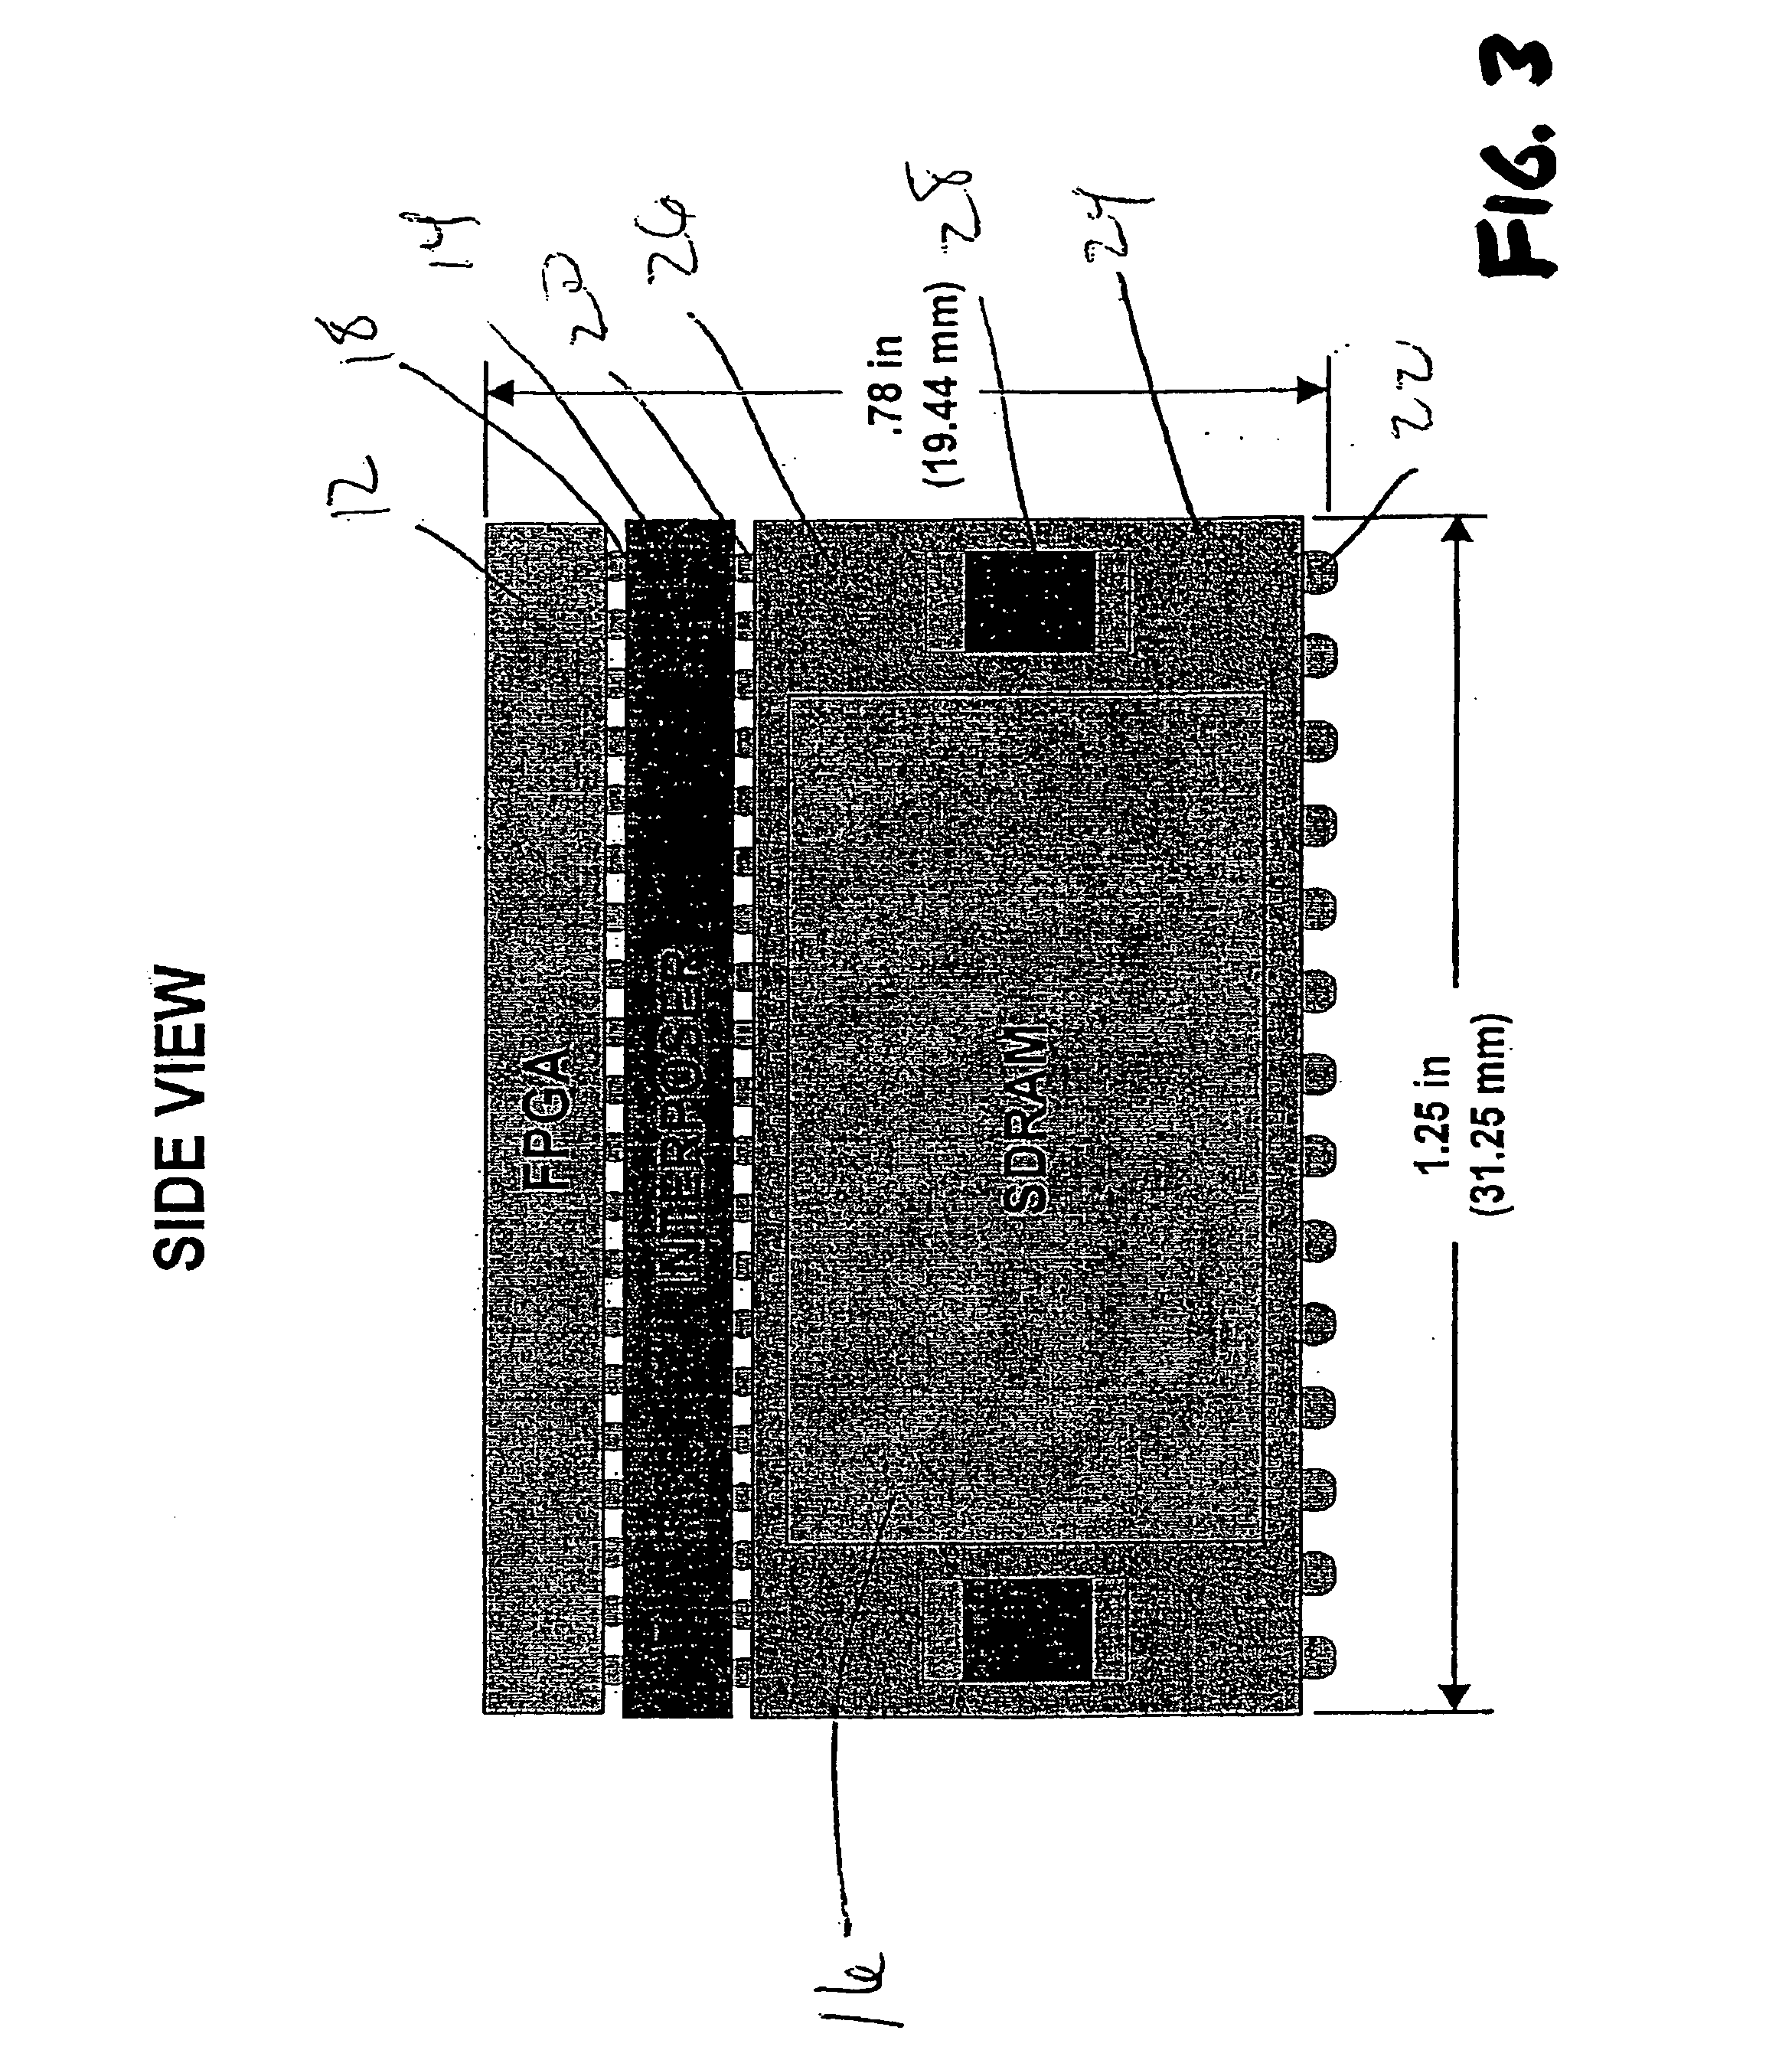 Field programmable gate array incorporating dedicated memory stacks